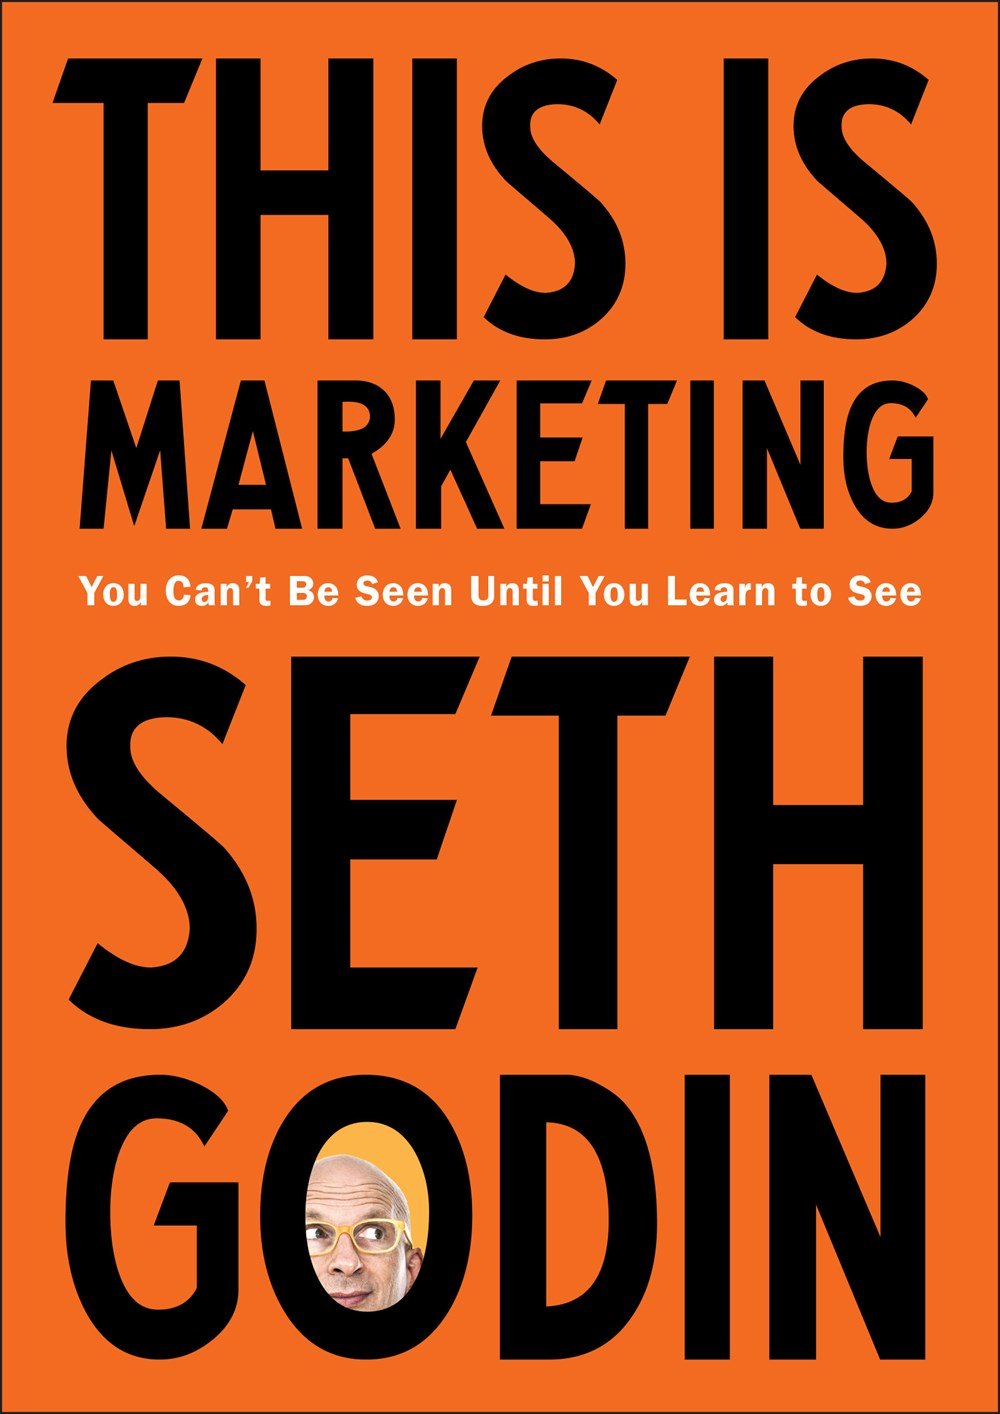 Cover of the book “This Is Marketing” by Seth Godin